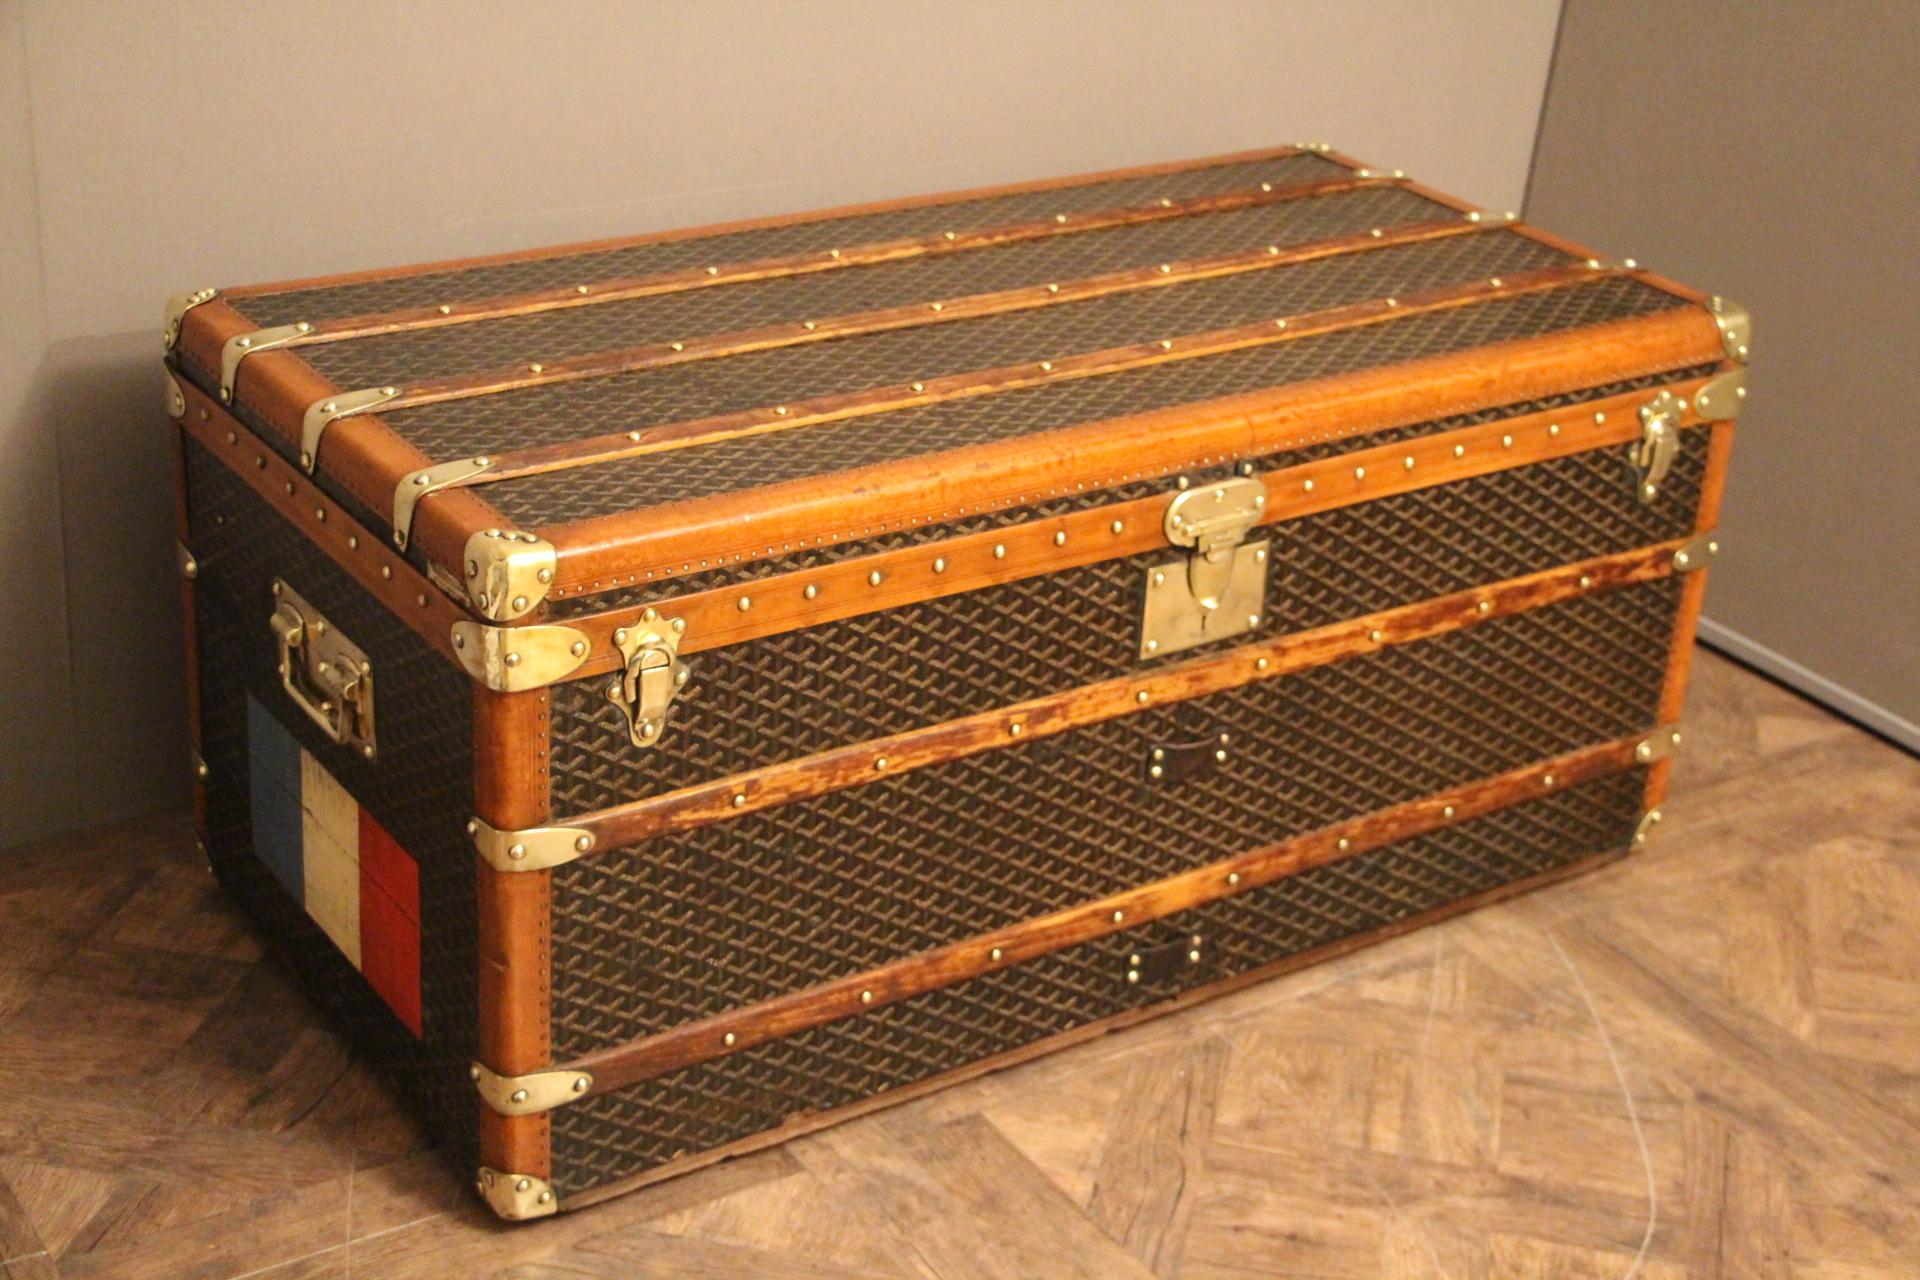 This Aine Goyard trunk has got very nice and unusual proportions as well as a beautiful, warm patina.
It features its famous and sought after chevron canvas, its original brass stamped lock, brass stamped clasps, brass stamped handles and honey